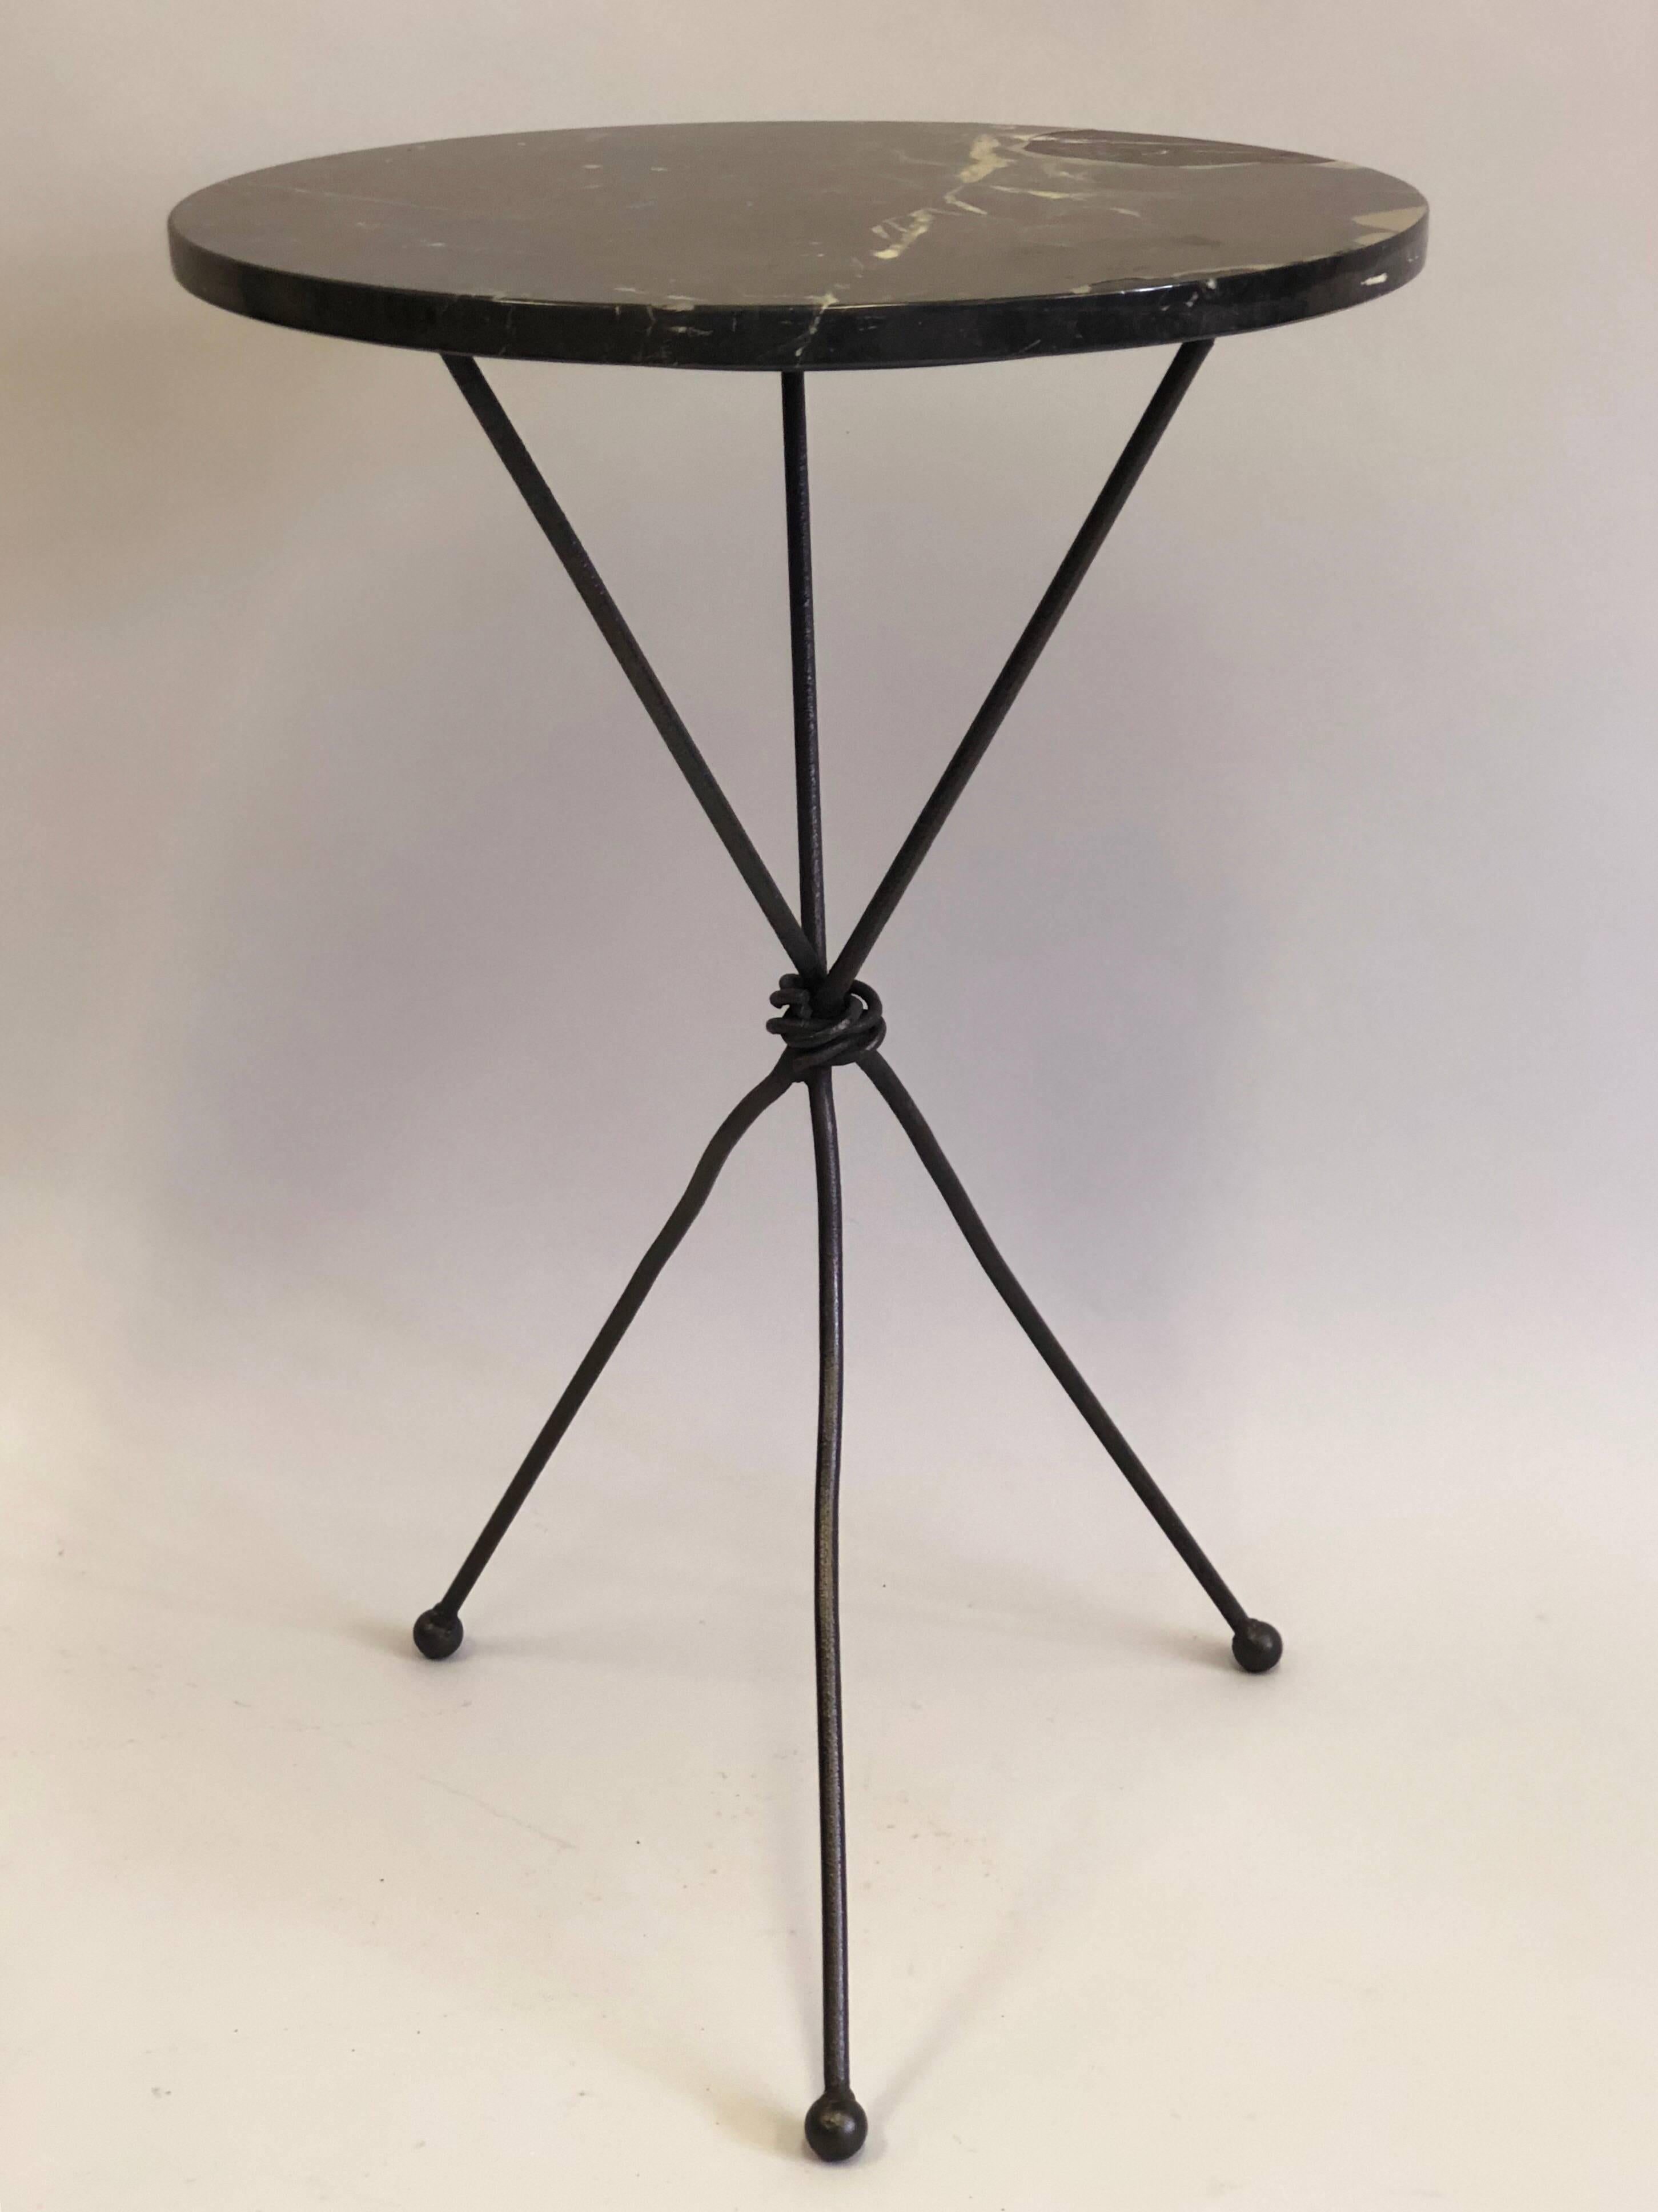 Pair of French hand-wrought Iron end or side tables or gueridons in the style of Alberto and Diego Giacometti for Jean Michel Frank.

The tables are composed of handmade wrought iron with the legs poetically set un-evenly apart forming a tripod